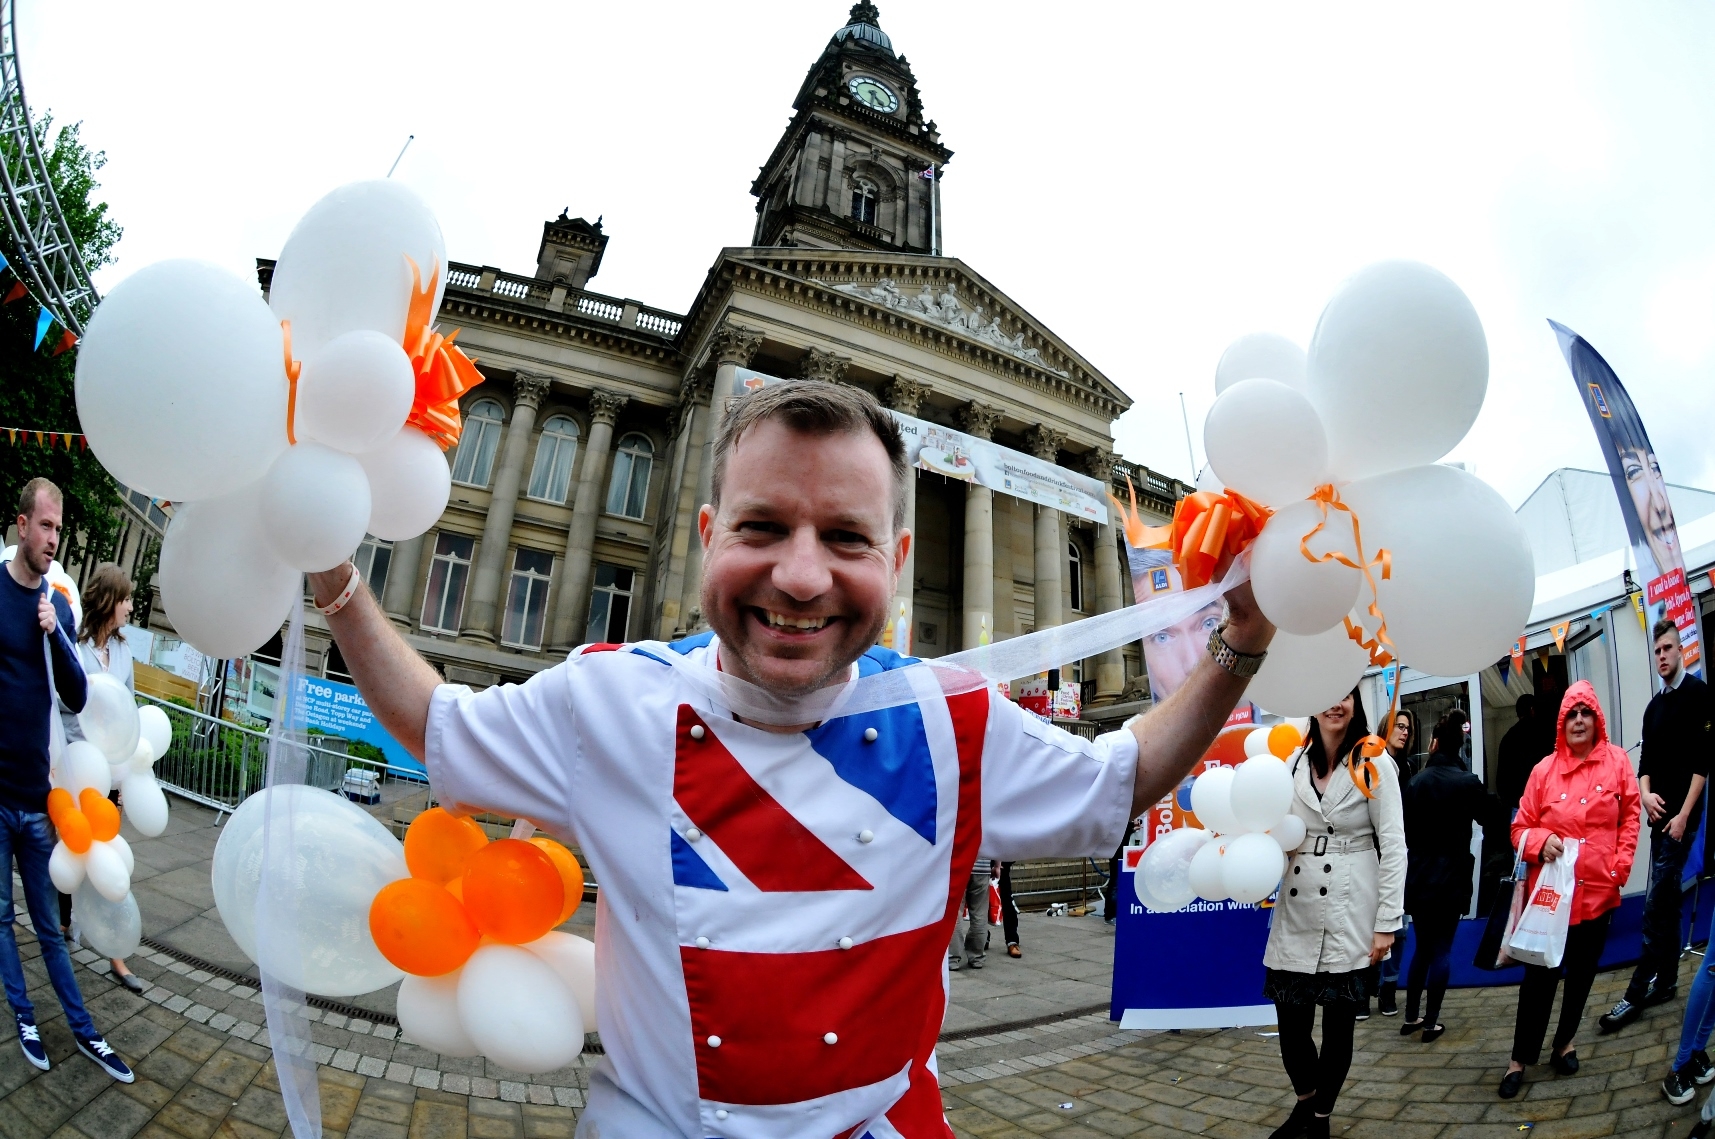 The 10th annual Bolton Food and Drink Festival, Victoria Square, Bolton, Lancashire. Chef Andrew Nutter leads the Conga to close the festival. Picture by Paul Heyes, Monday August 31, 2015.